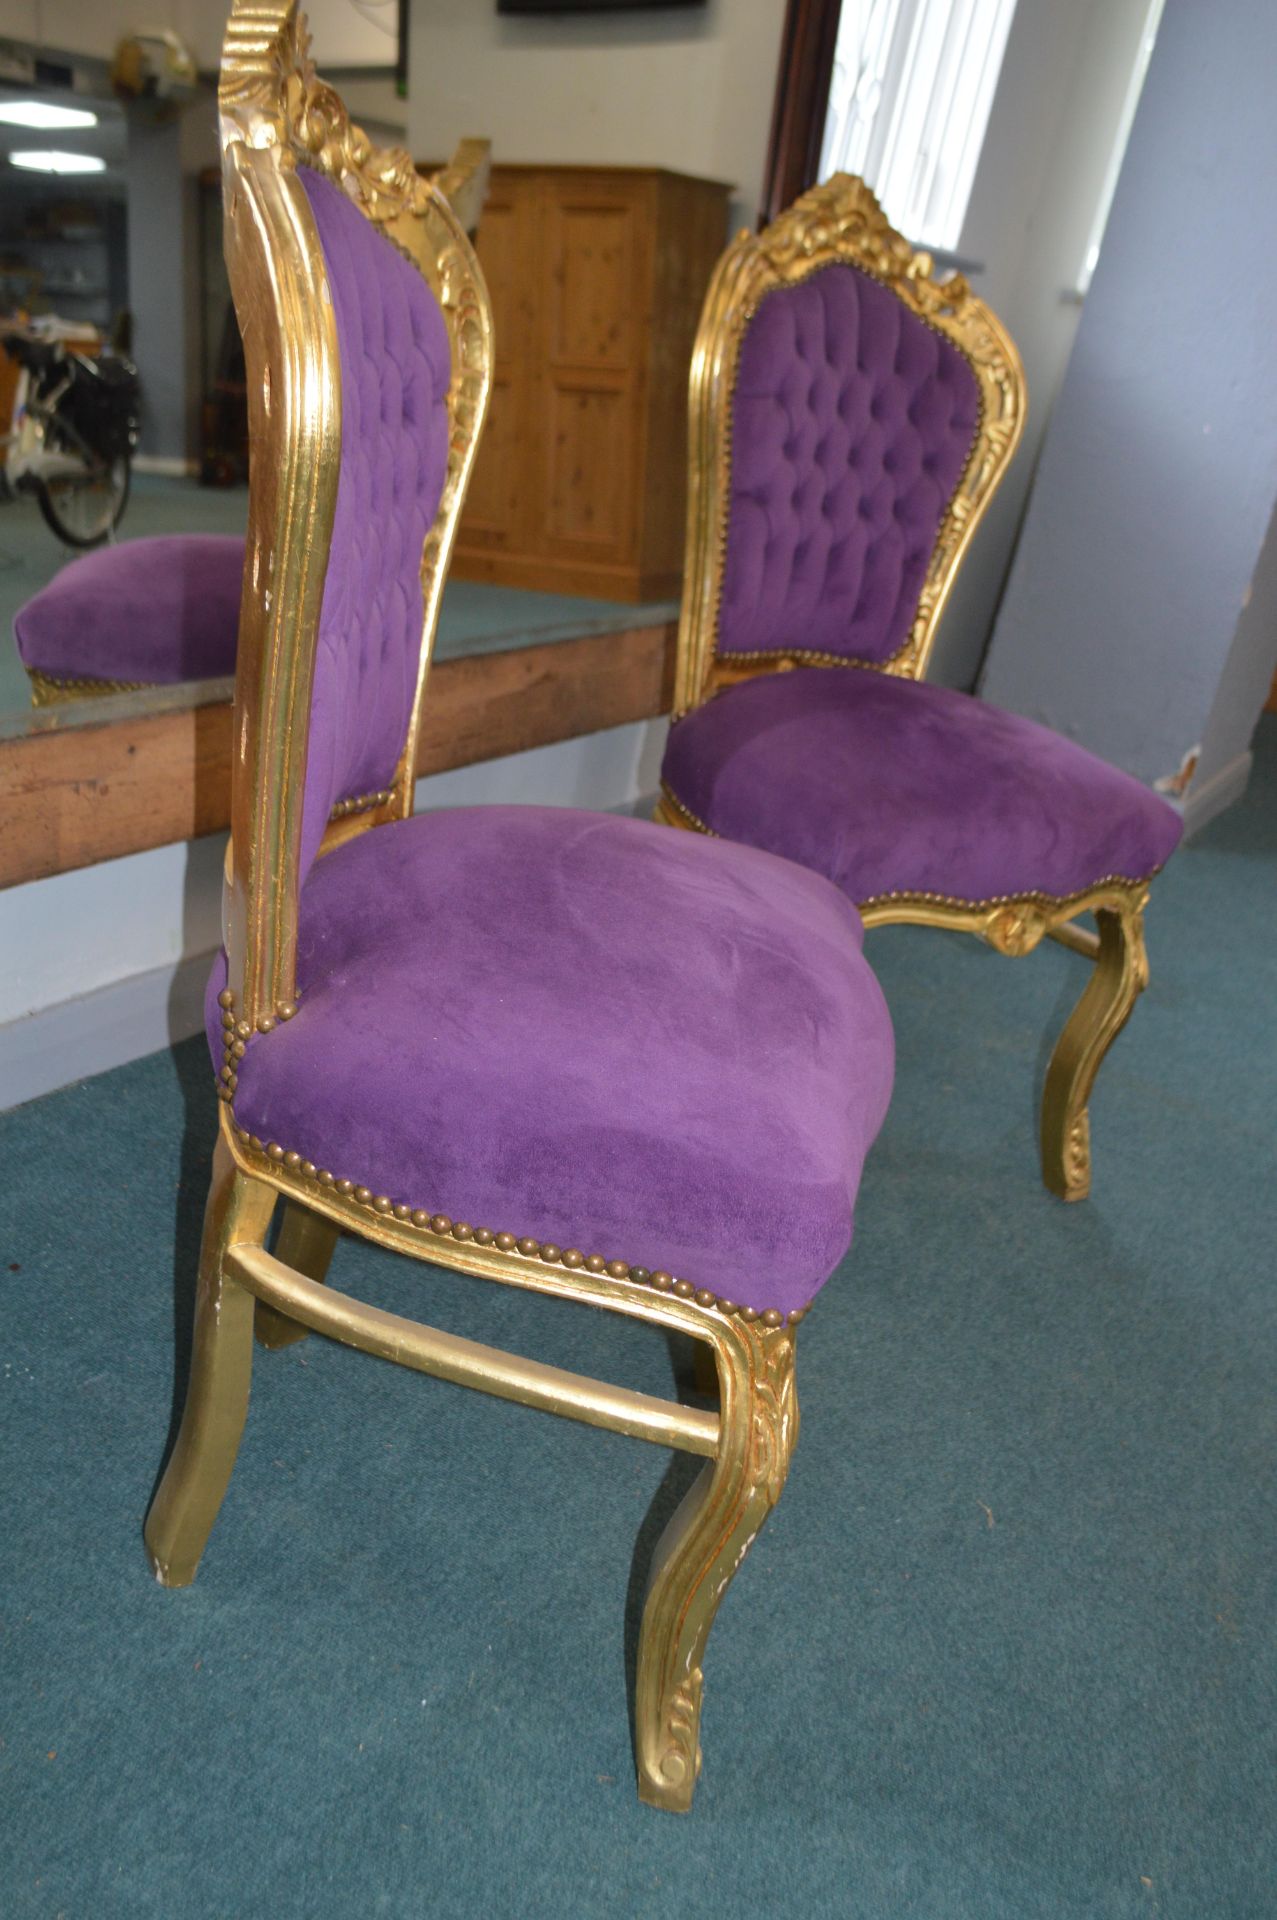 Pair of Ornate Gilded Chairs with Purple Plush Uph - Image 2 of 2